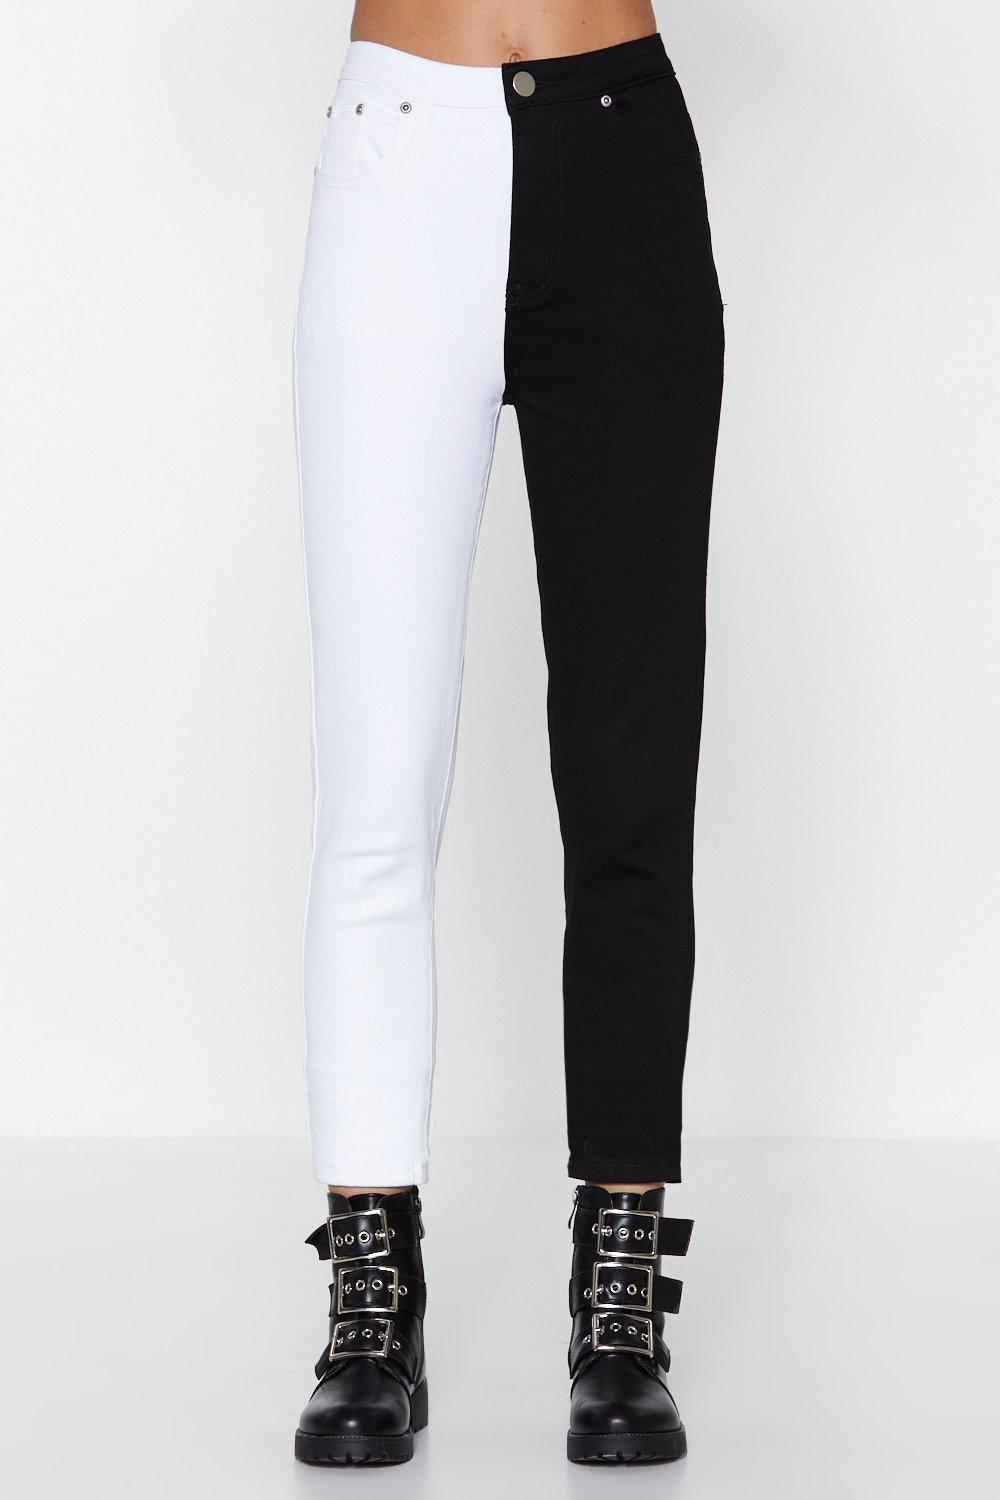 Nasty Gal "you Don't Know The Half Of It Skinny Jeans" in Black | Lyst